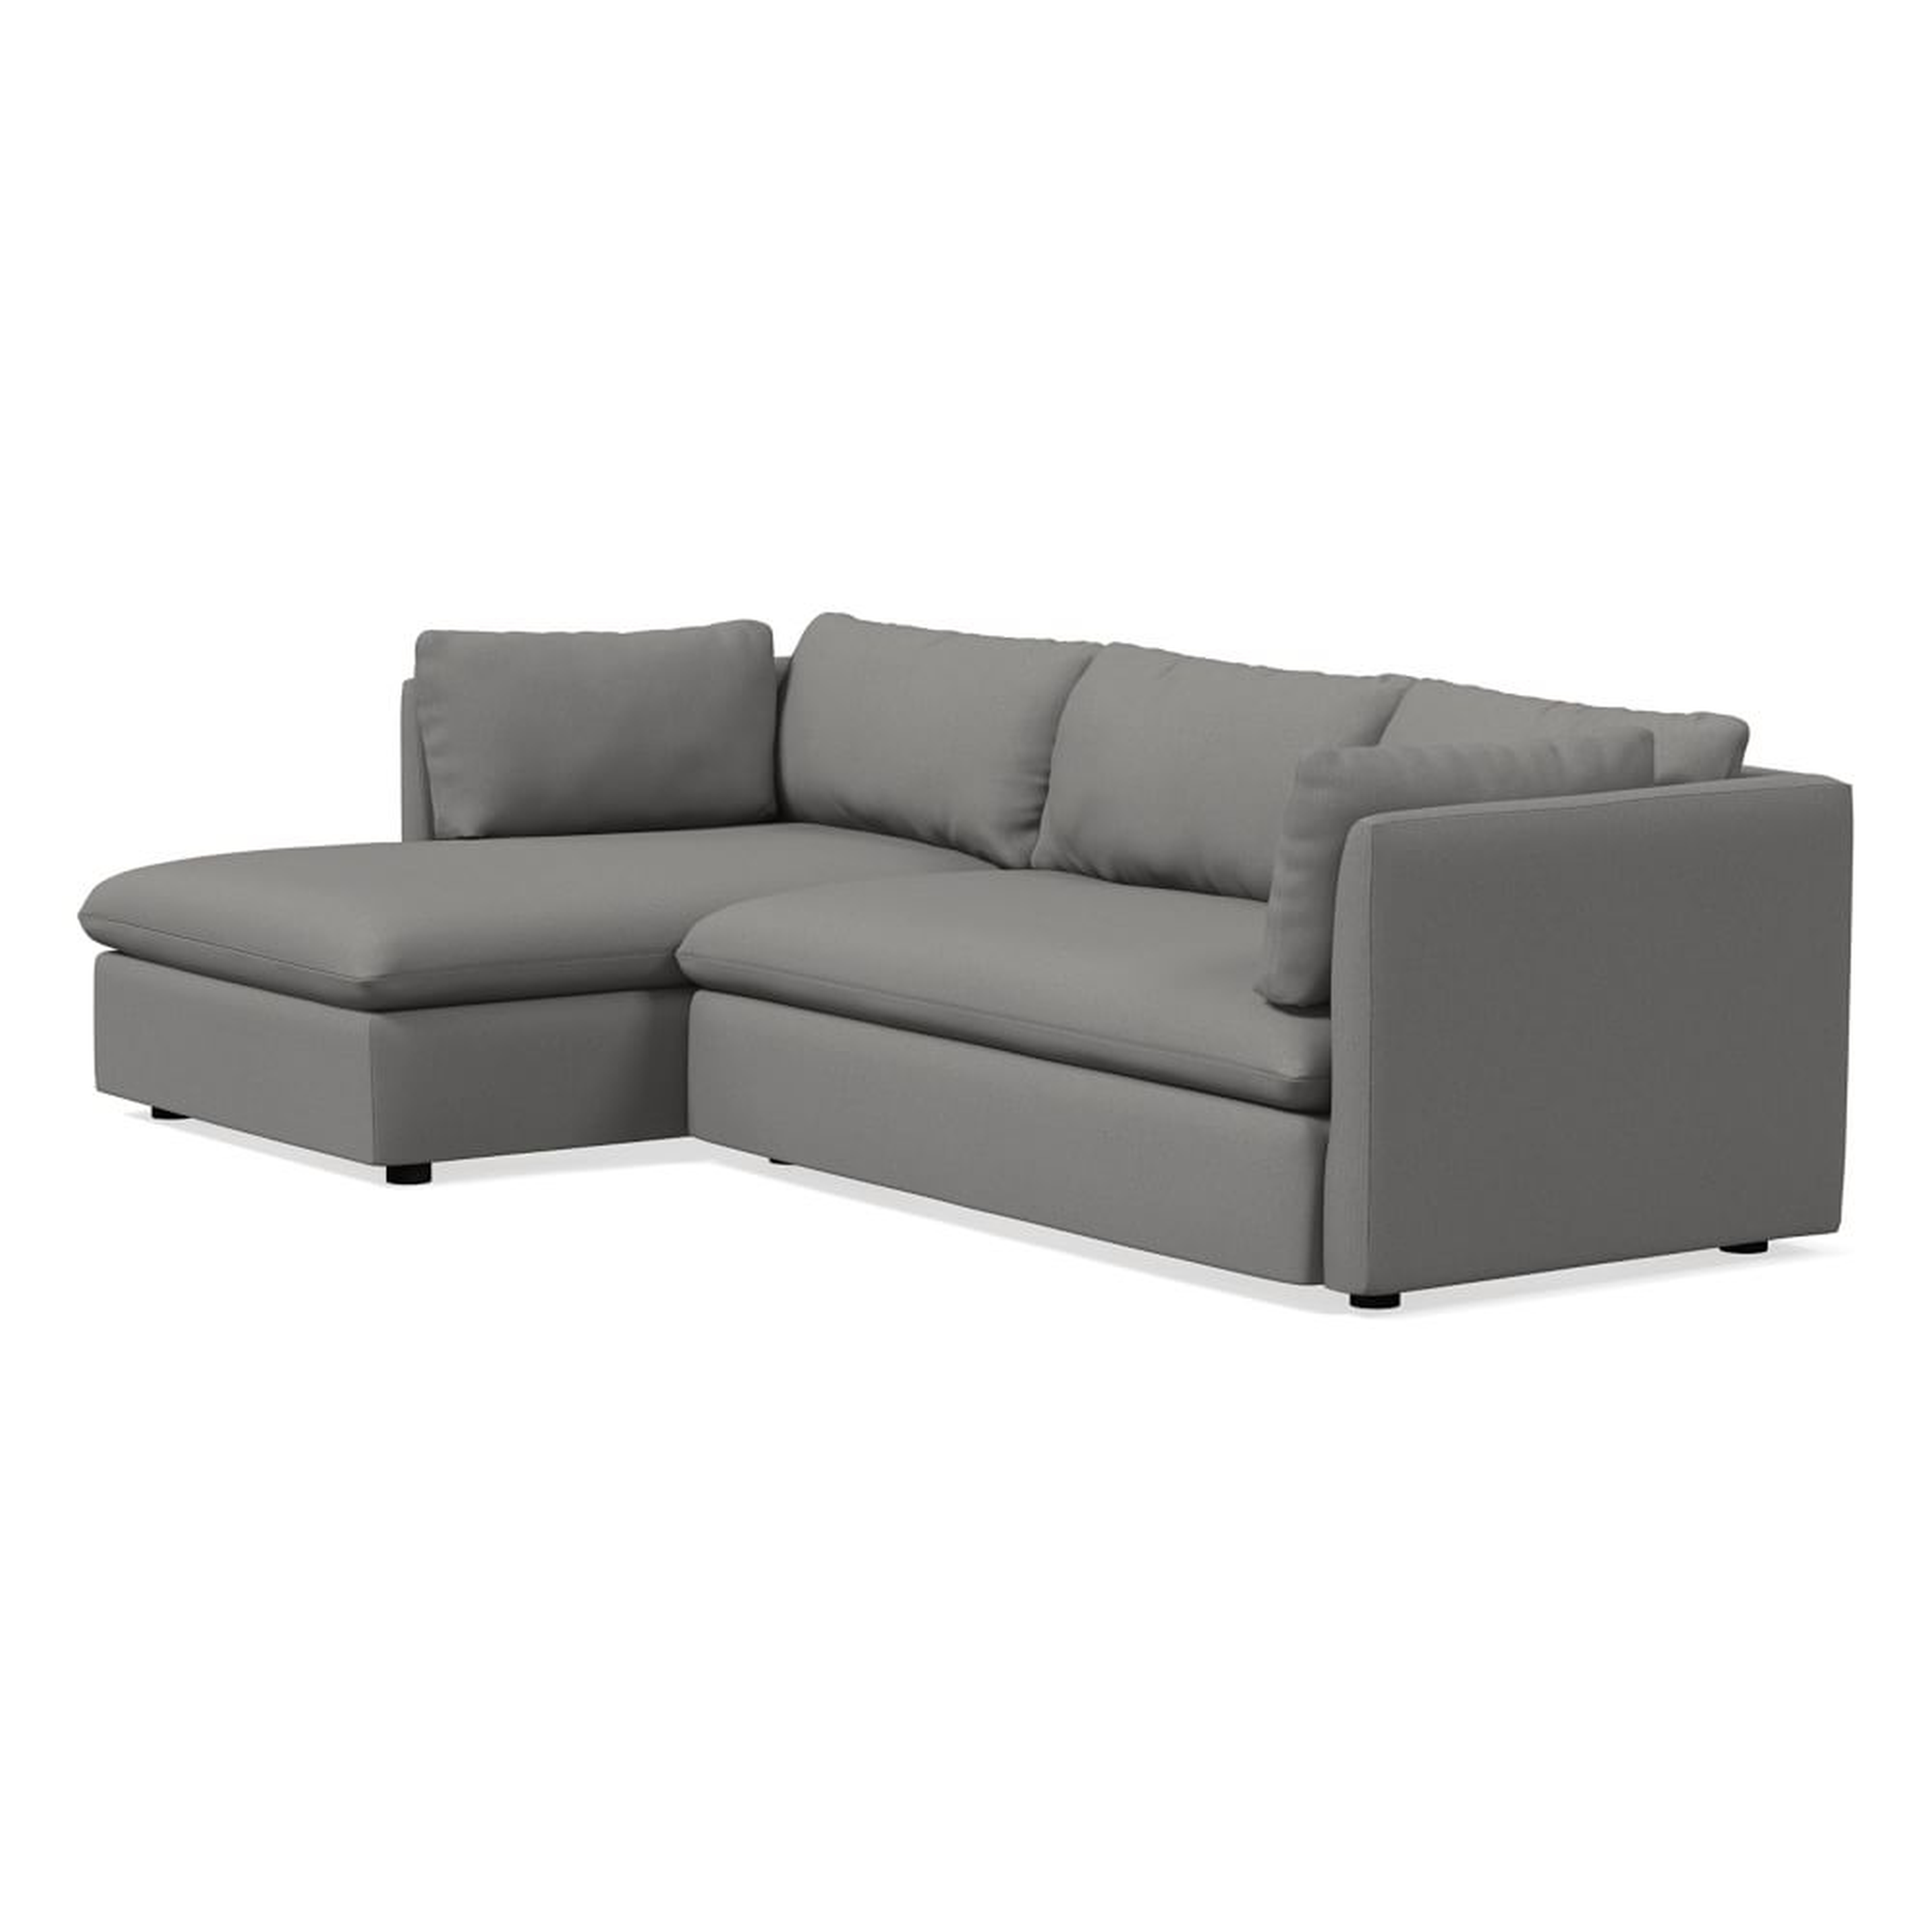 Shelter 105" Left 2-Piece Chaise Sectional, Performance Washed Canvas, Storm Gray - West Elm